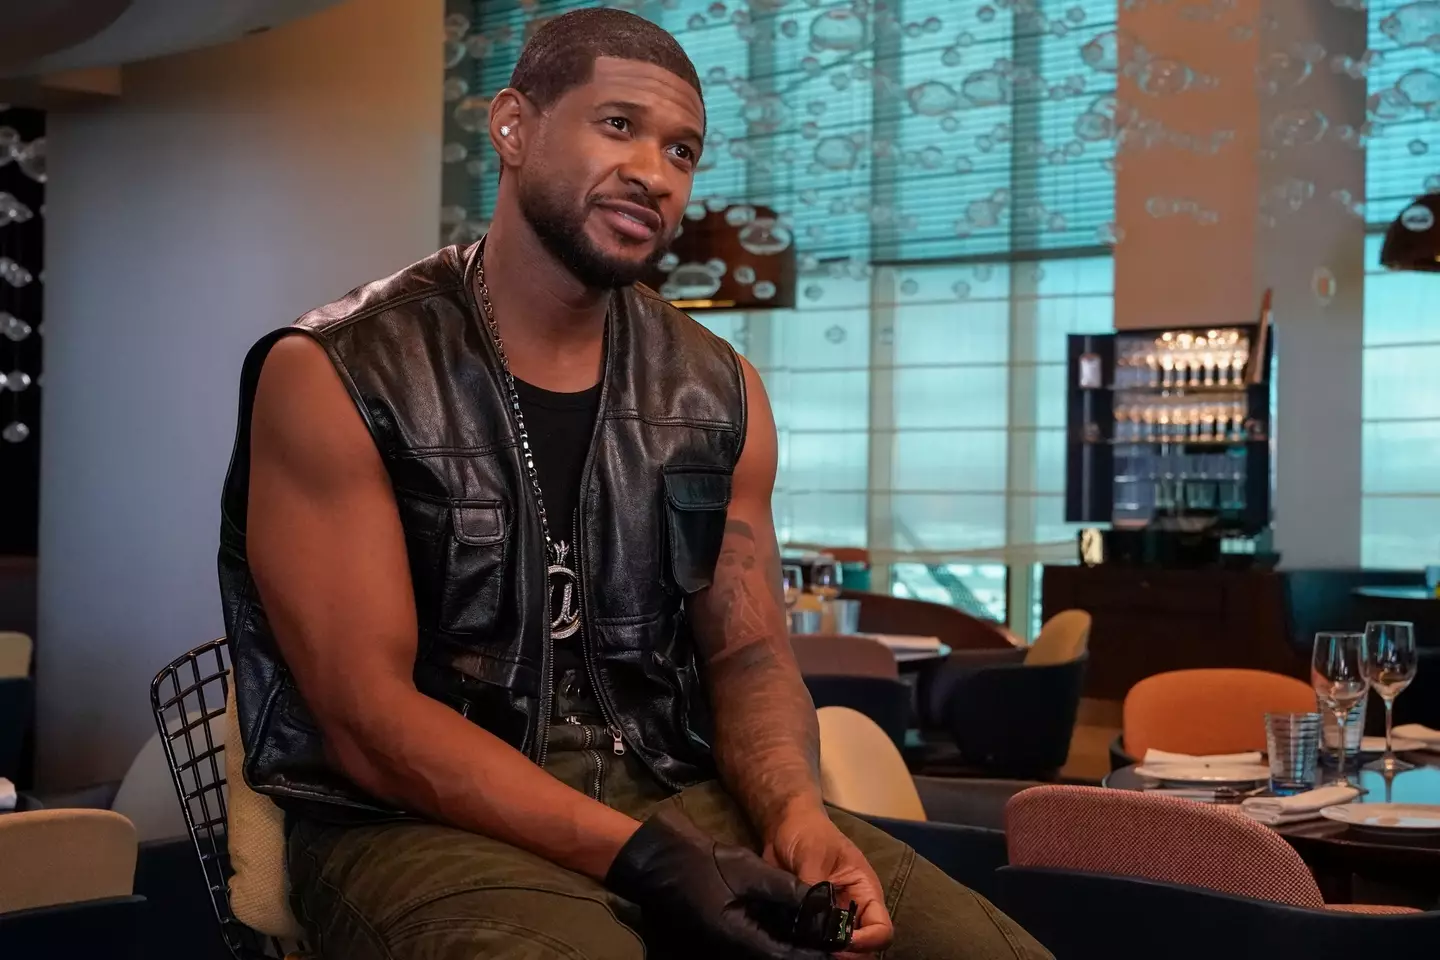 Usher has a hits across 3 decades to choose from for his performance.